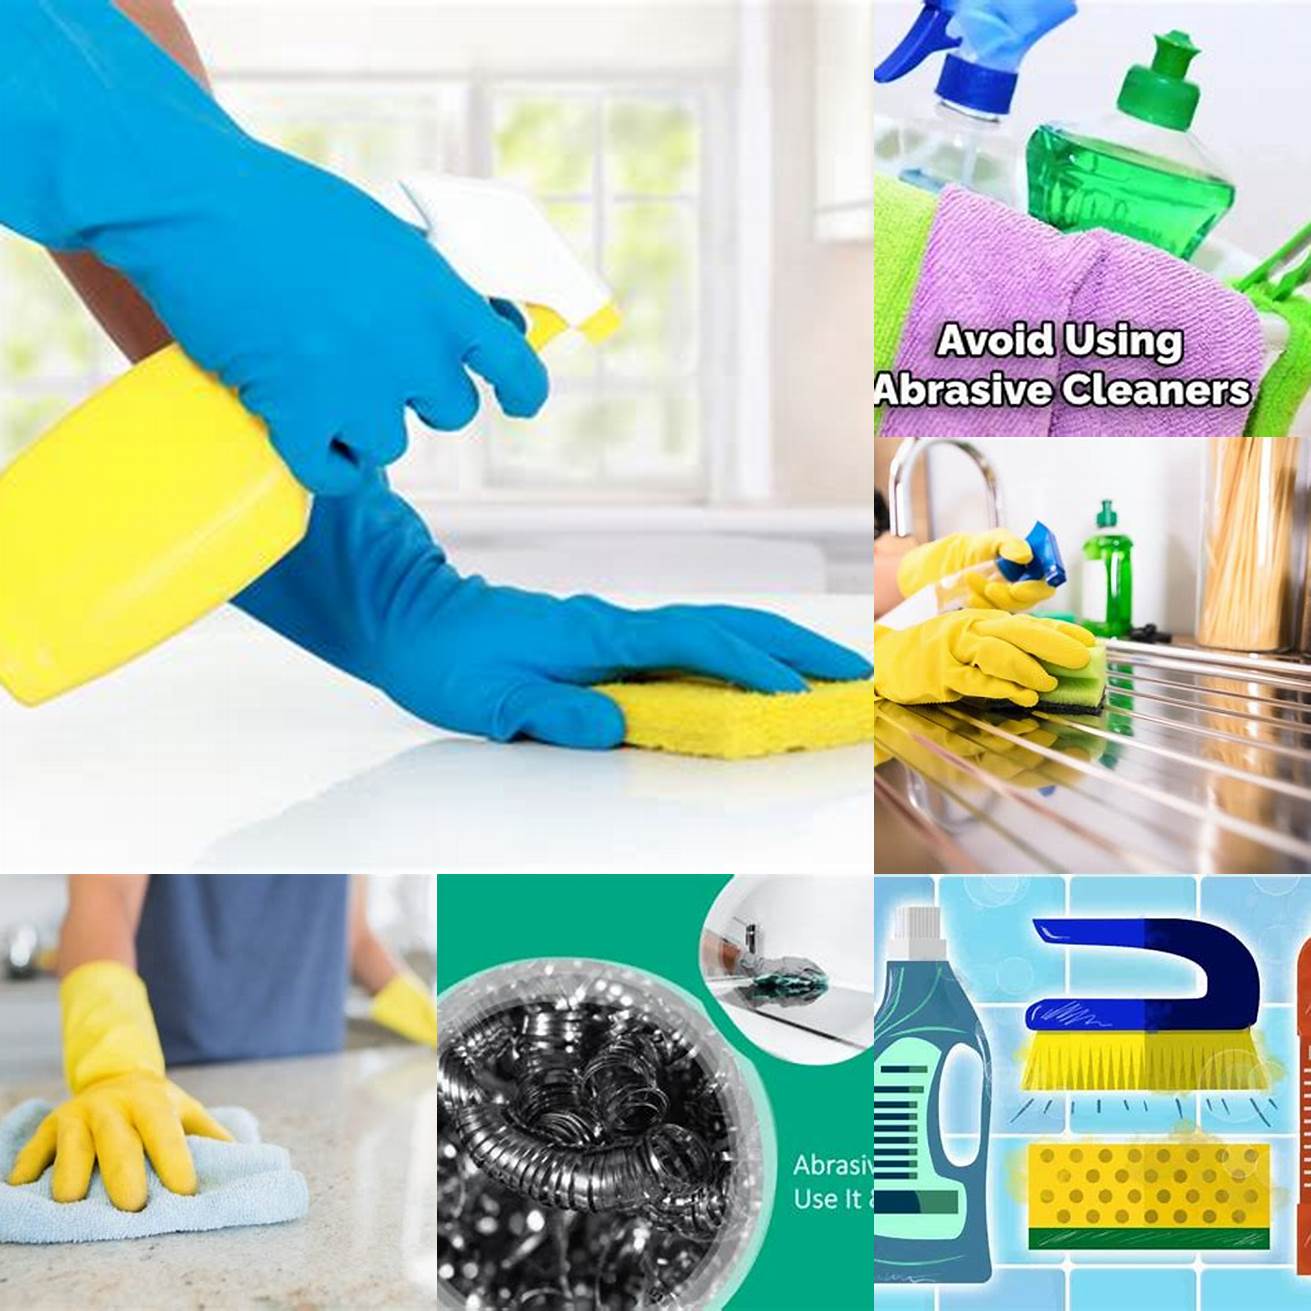 Avoid using abrasive cleaning tools